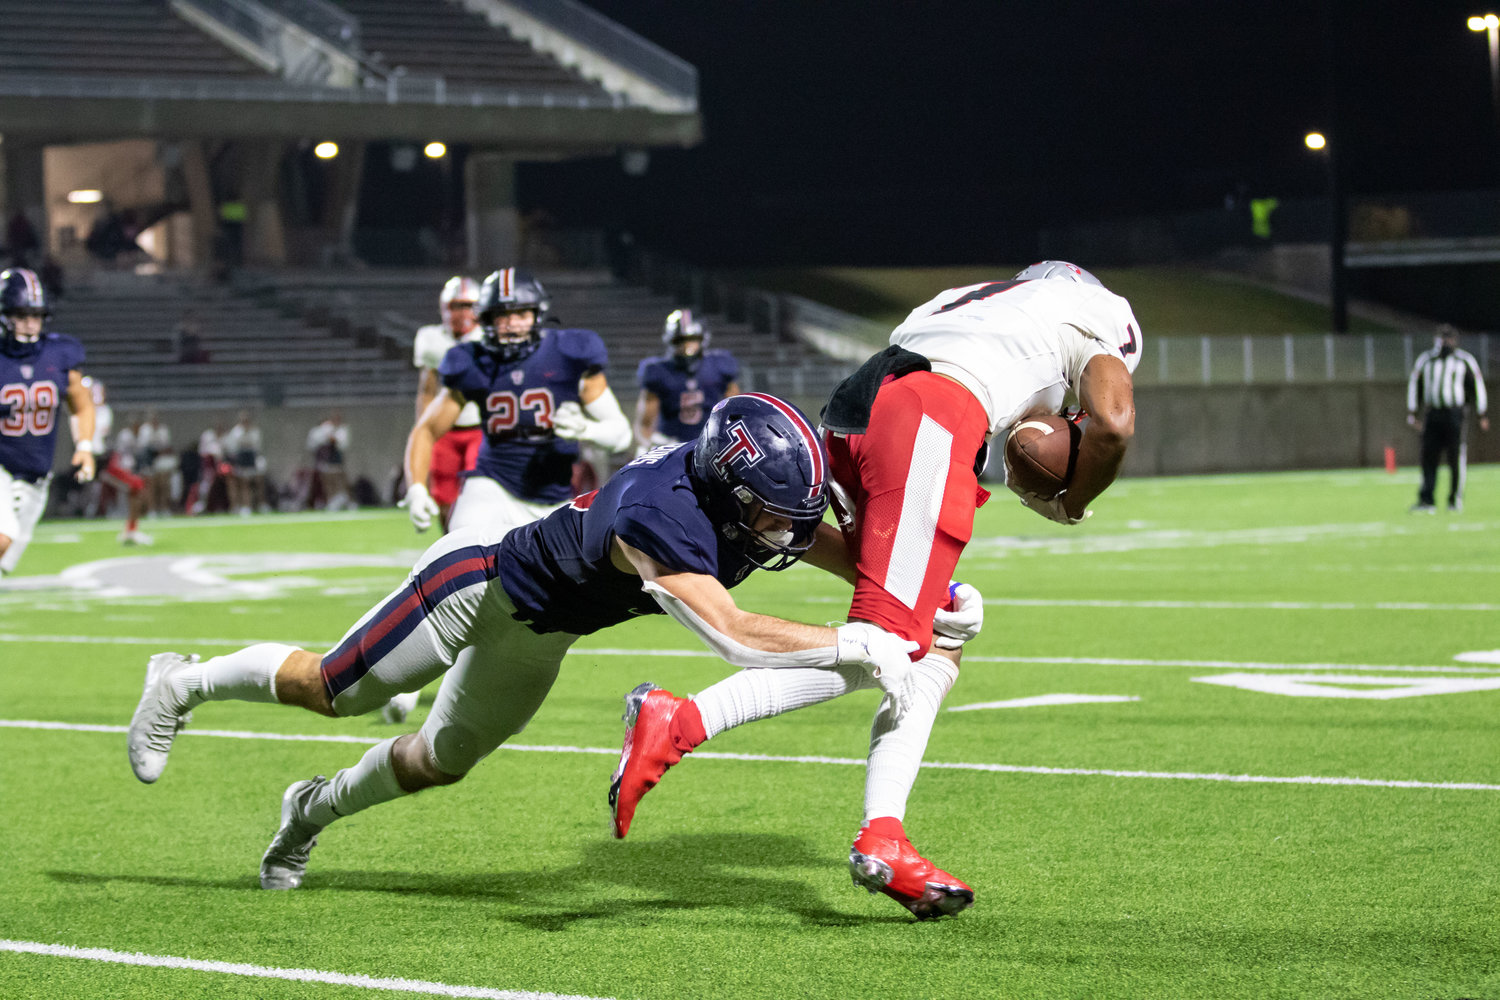 Tompkins senior safety Colby Huerter brings down Travis receiver Cameron Moore during the Falcons' 42-10 Class 6A Division I bi-district playoff win over Fort Bend Travis on Dec. 11 at Legacy Stadium.